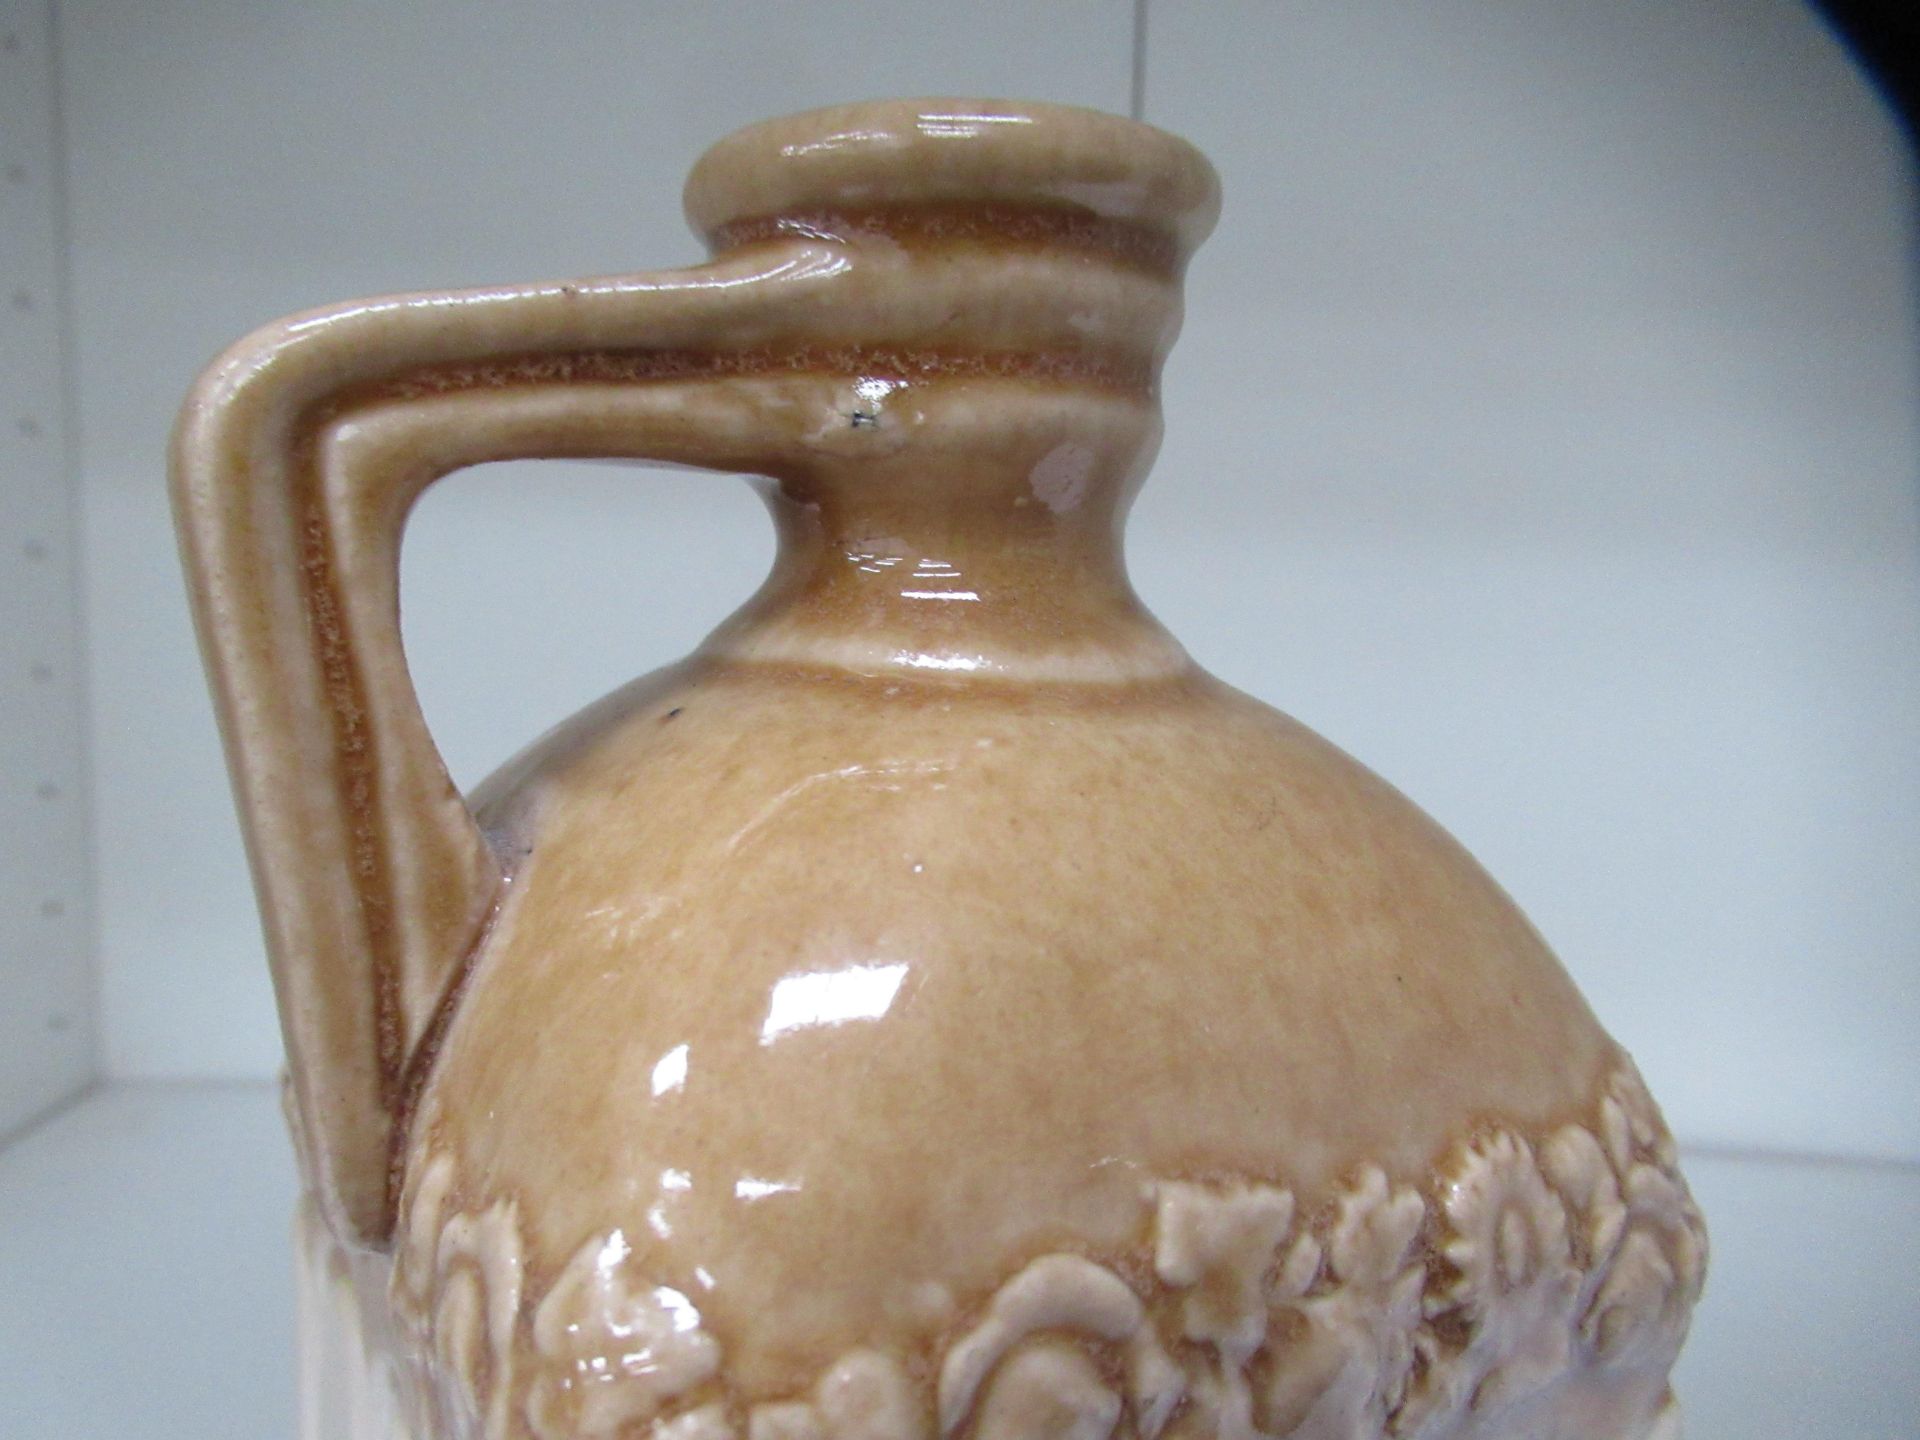 Stone bottle with floral detailing below bottle neck and 'G' stamp on handle - Image 7 of 8